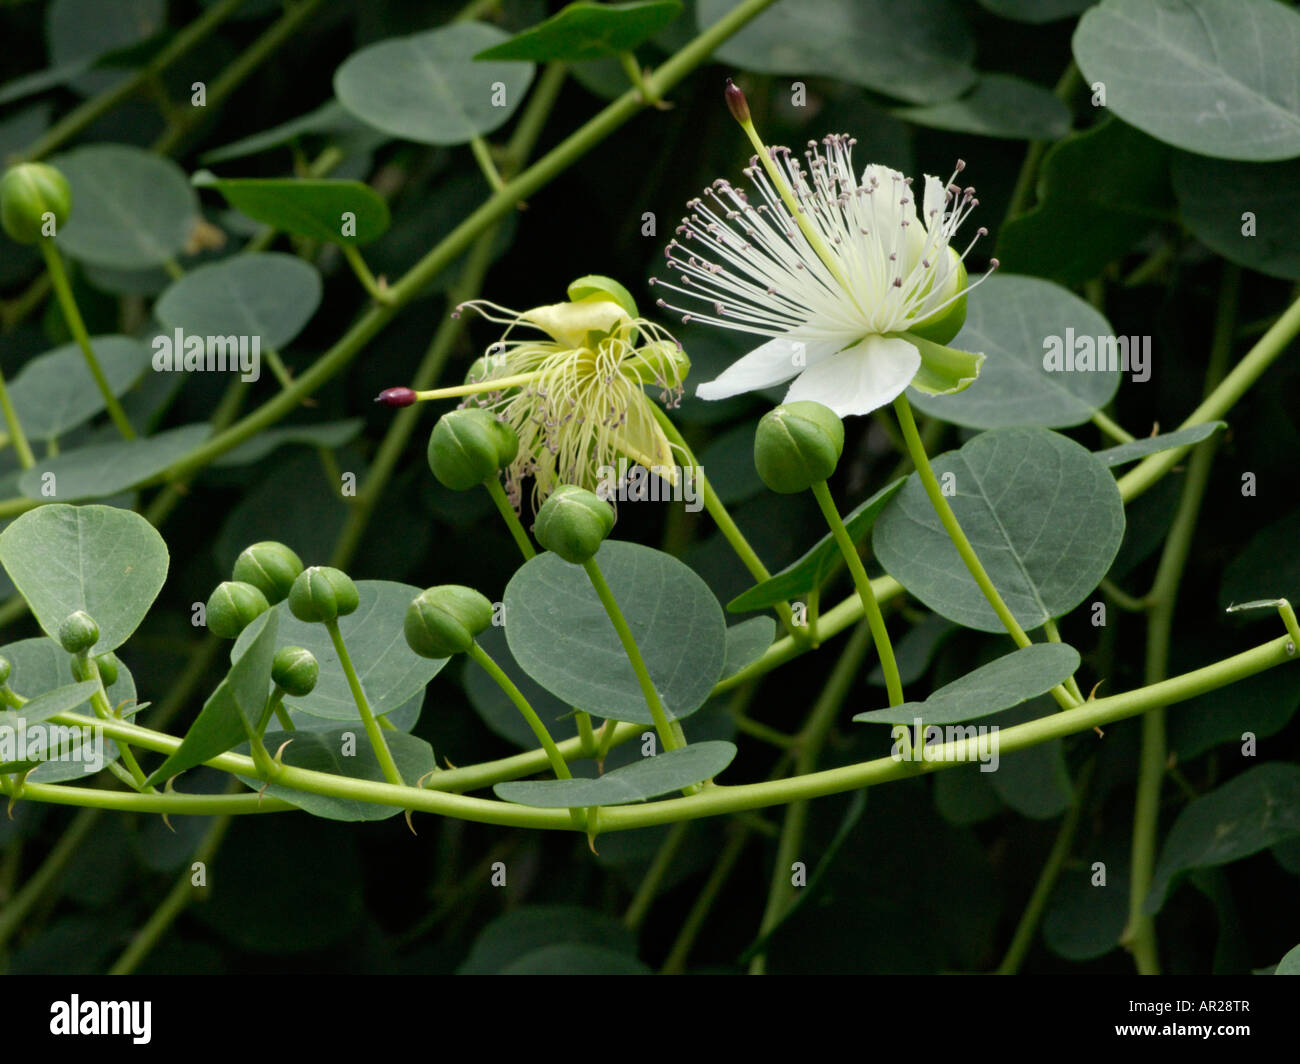 Plant caper stock photography images - Alamy